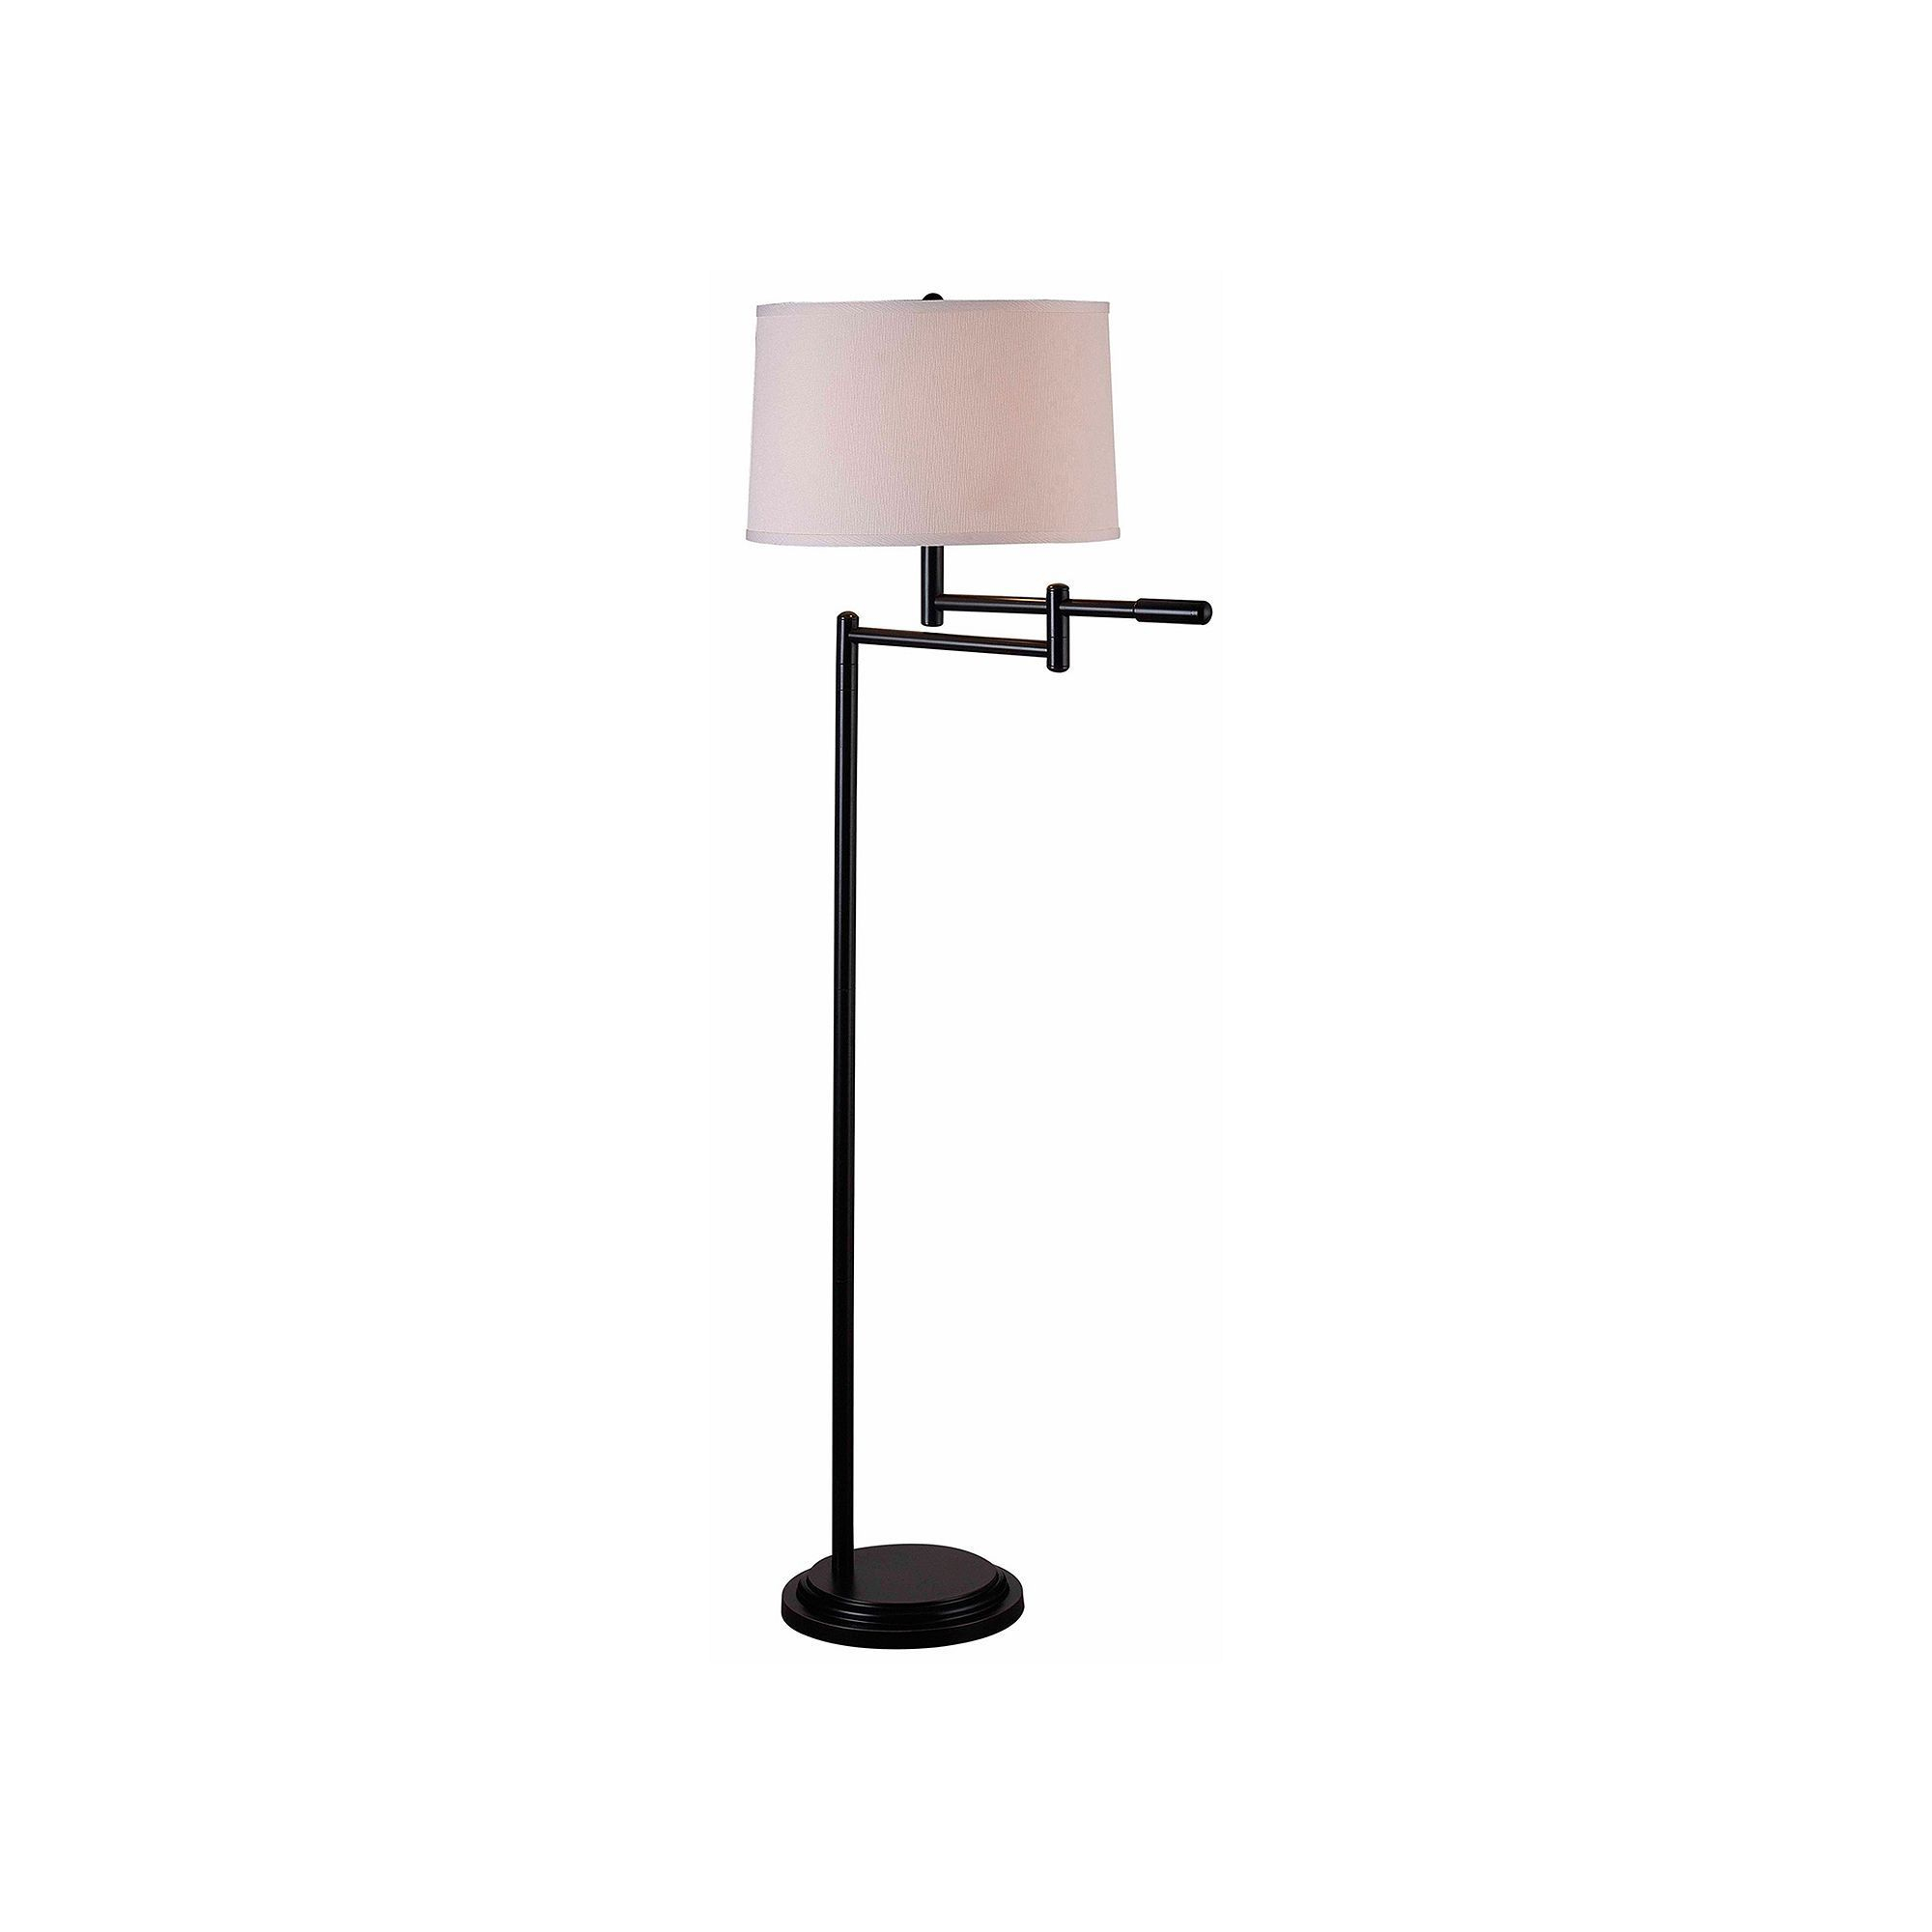 Kenroy Home Theta Swing Arm Floor Lamp Products Copper inside dimensions 2000 X 2000